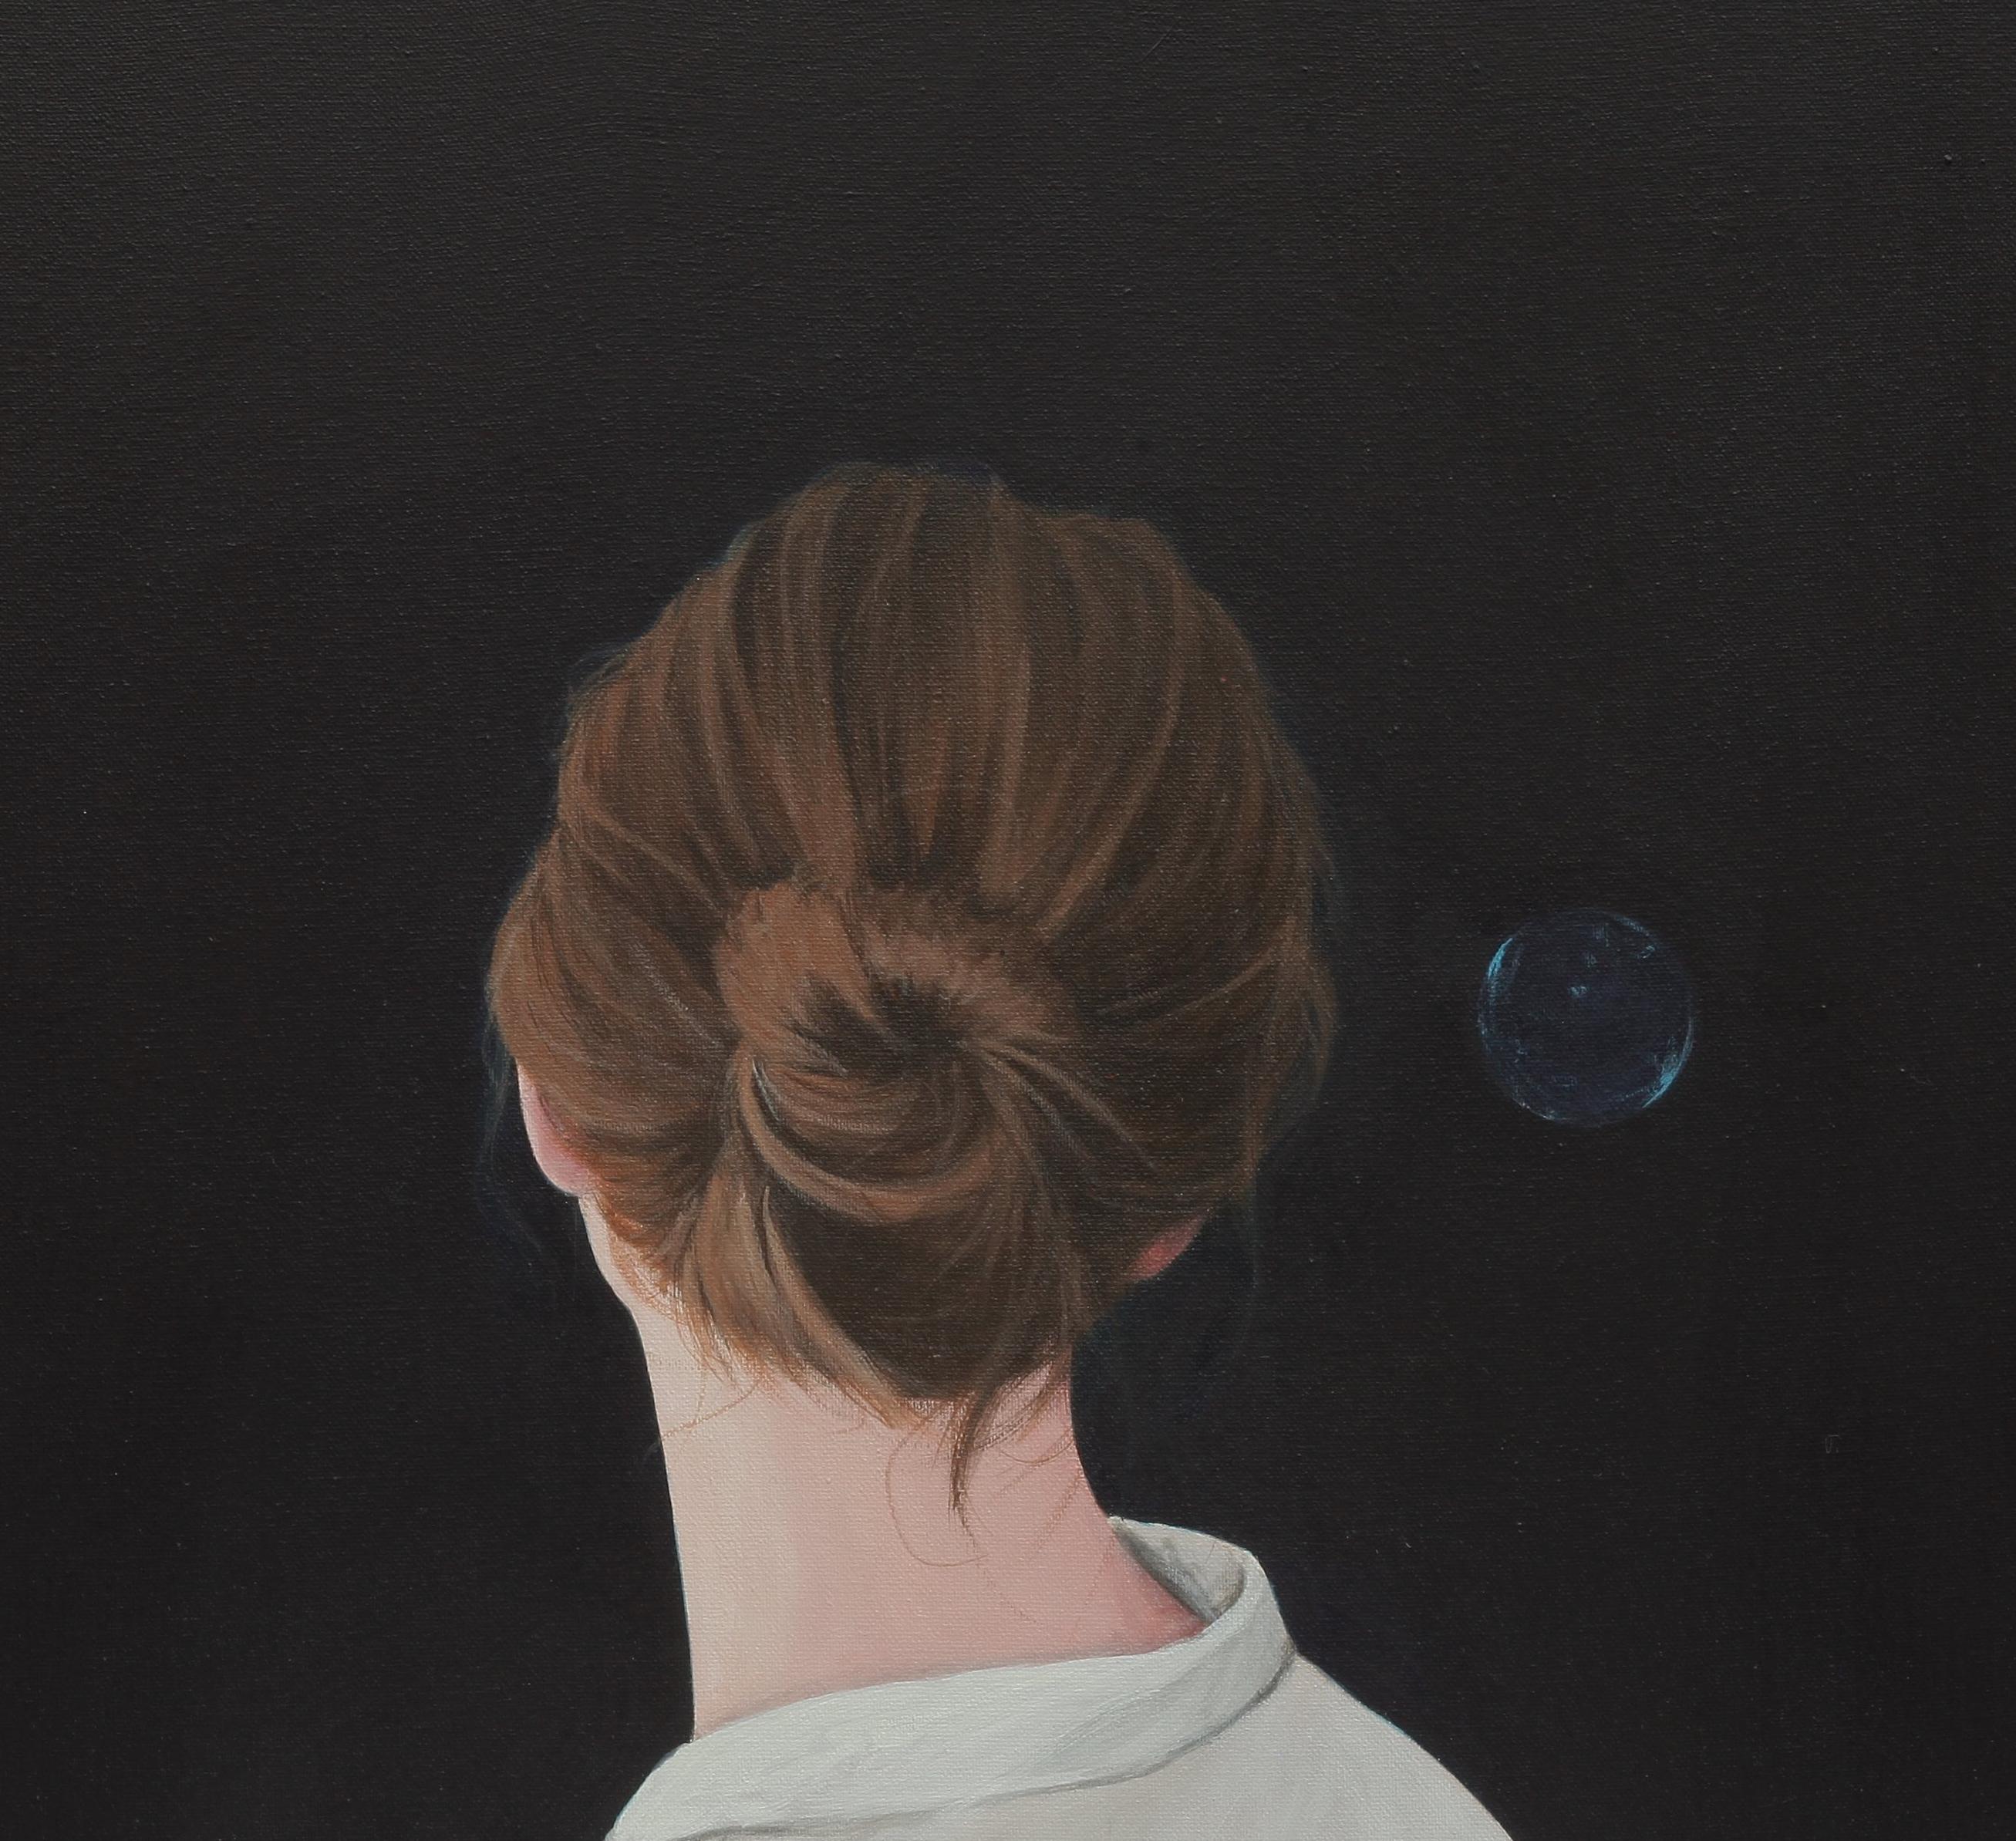 Contemporary Portrait of Girl with White Blouse on Black Background Soap Bubbles - Painting by Karoline Kroiss